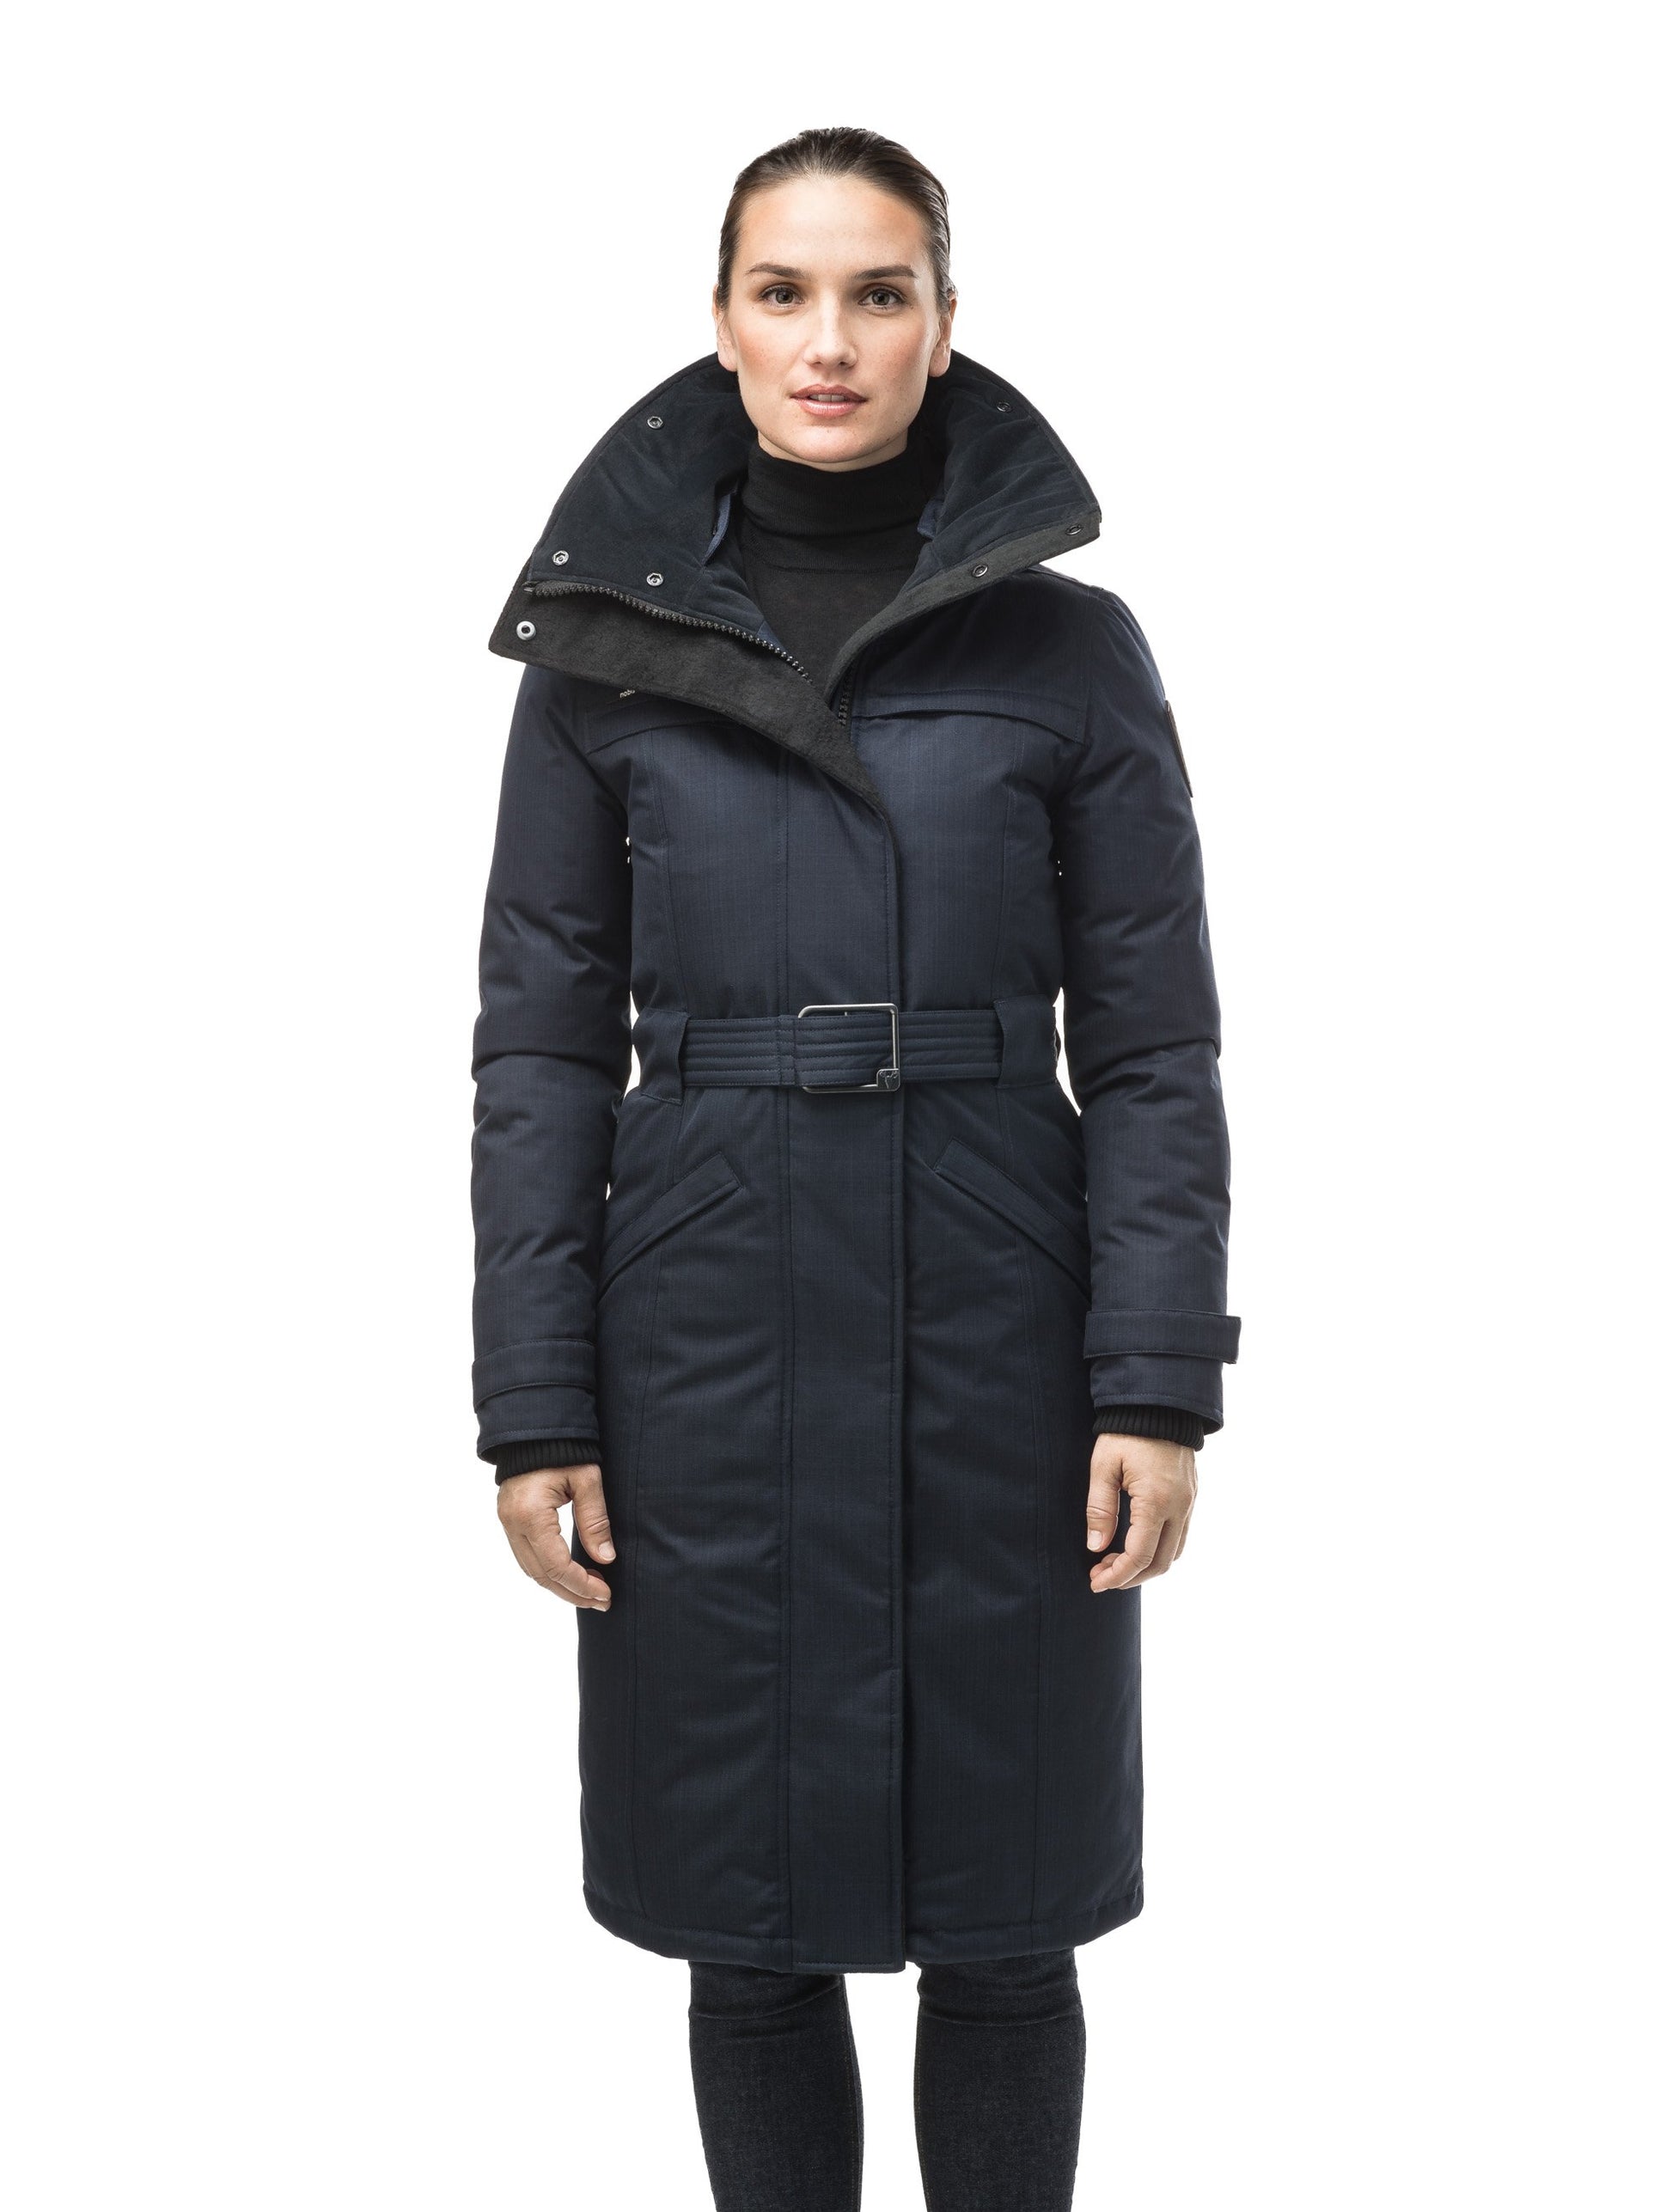 Women's knee length down filled parka with a belted waist and fully removable Coyote and Rex Rabbit fur ruffs in CH Navy